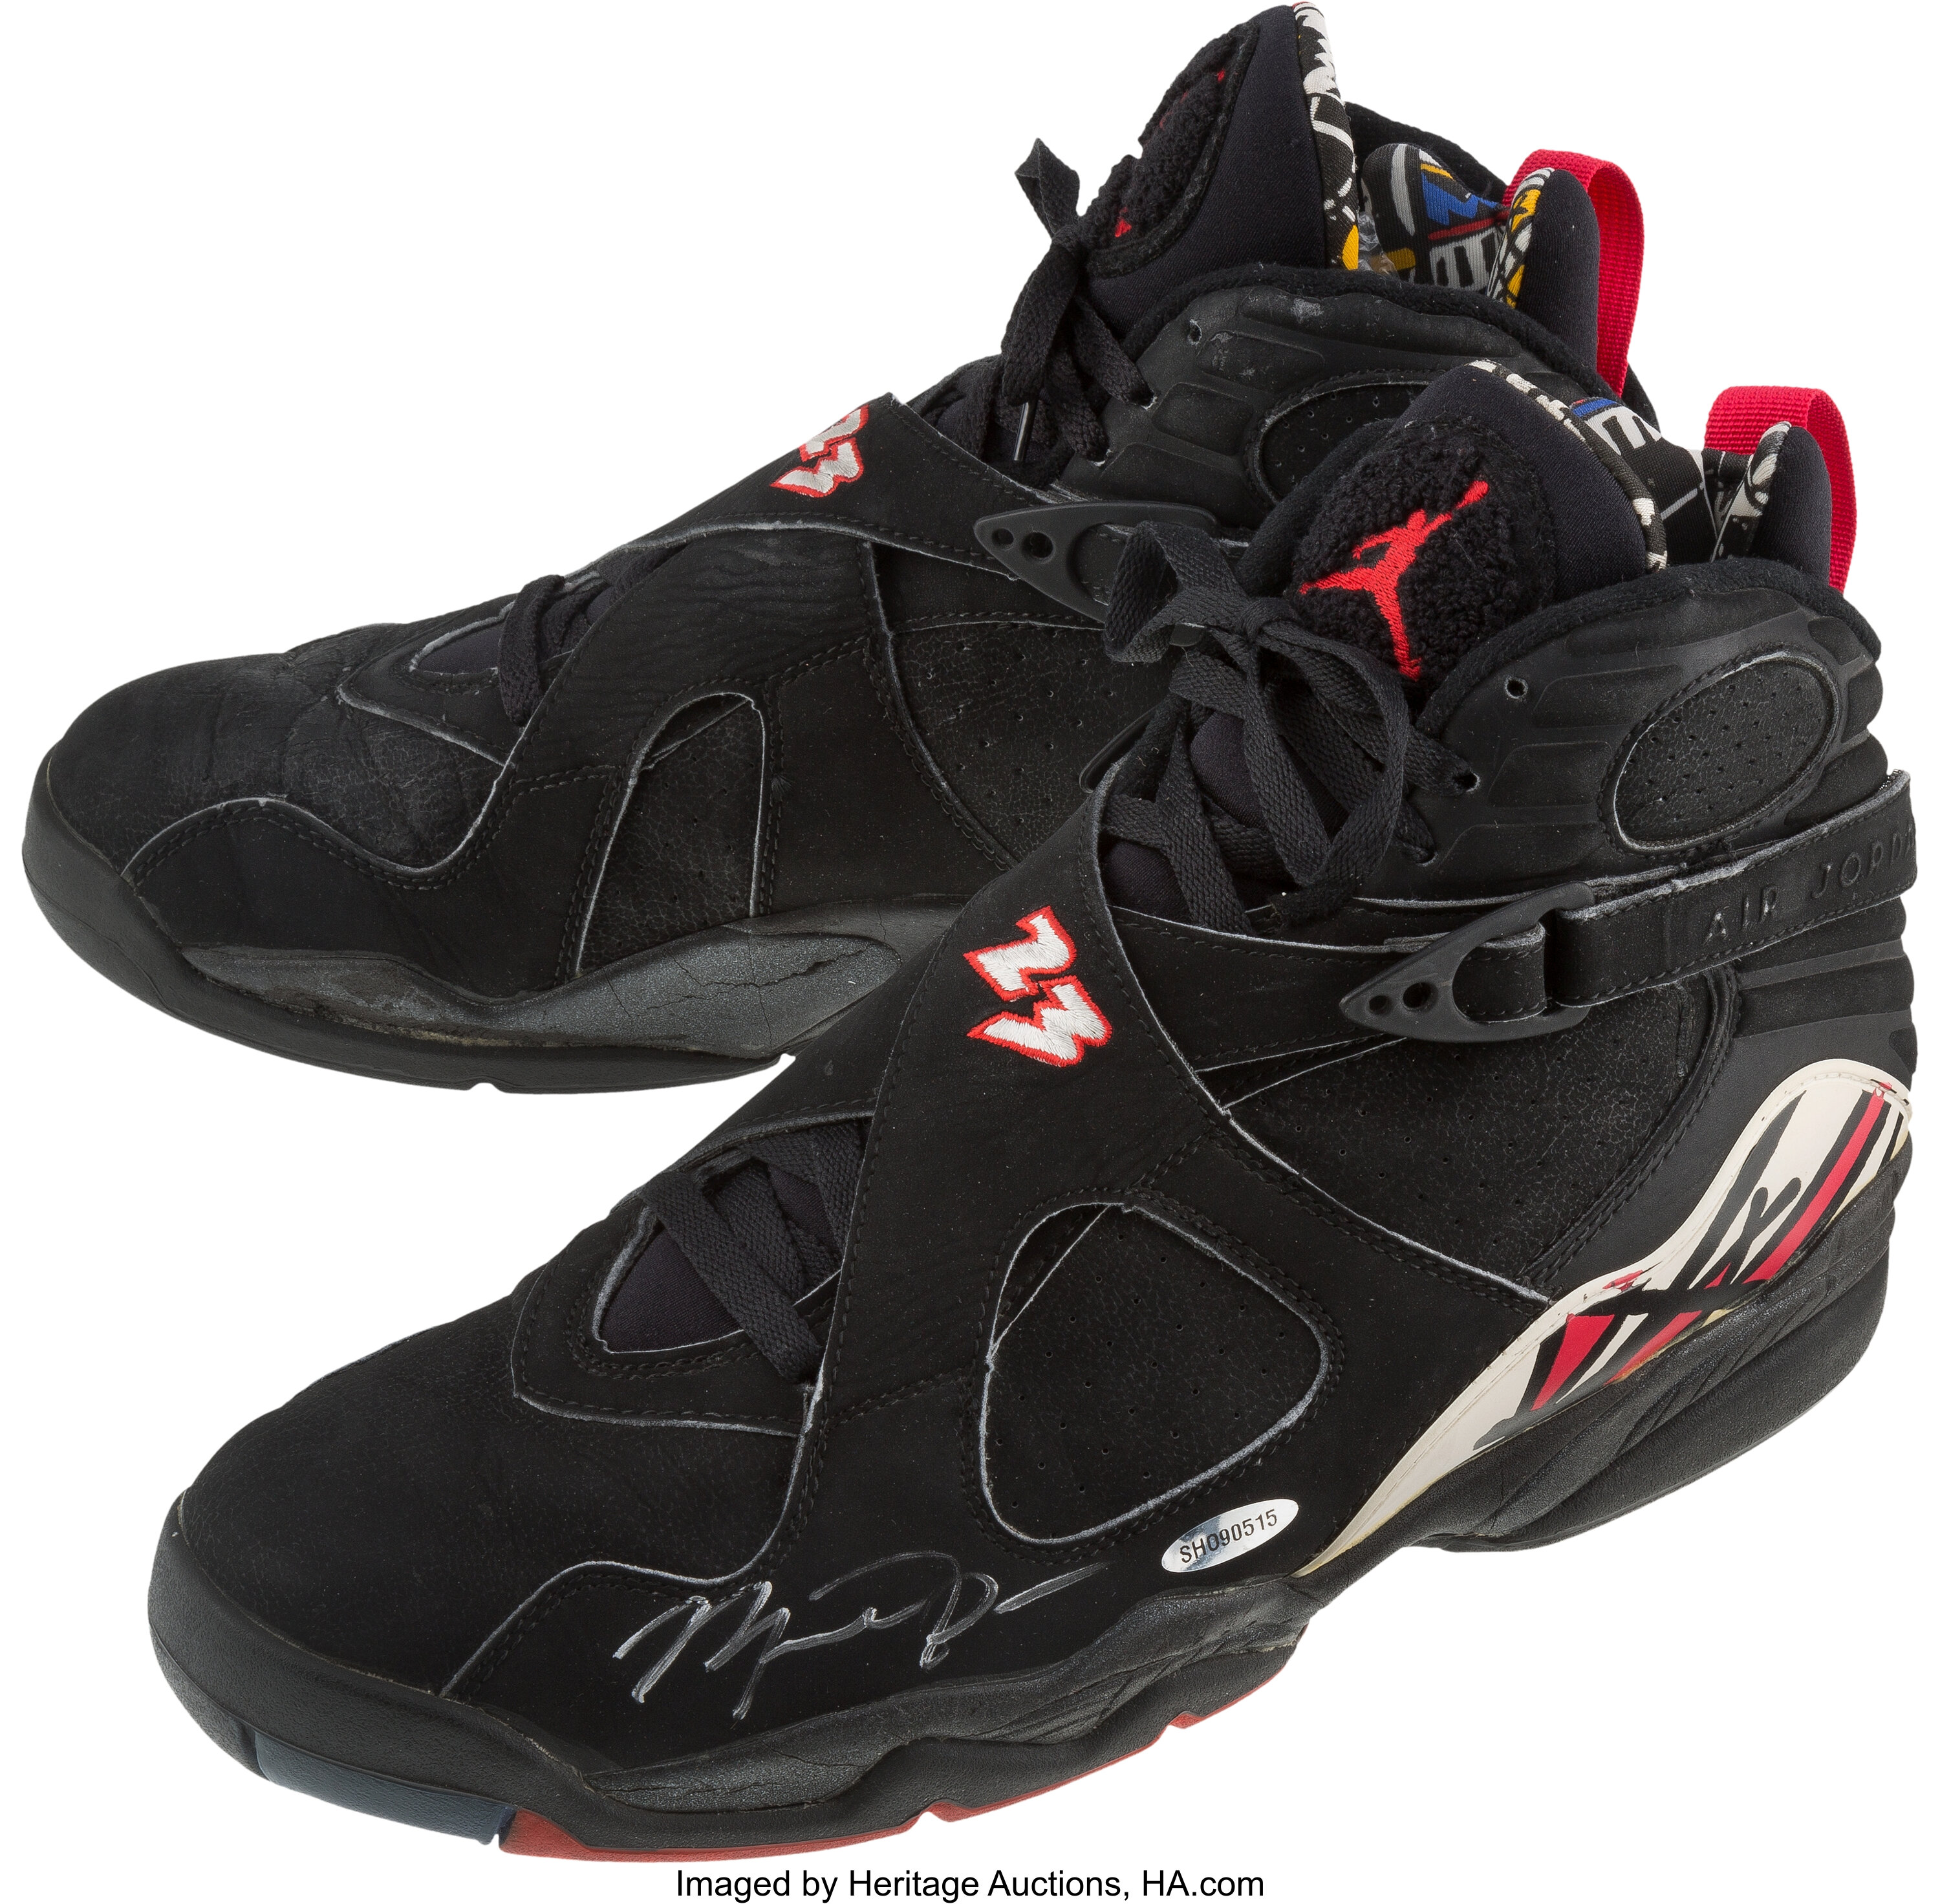 Michael Jordan Worn, Signed Shoes with Upper Deck | Lot #80622 | Heritage Auctions